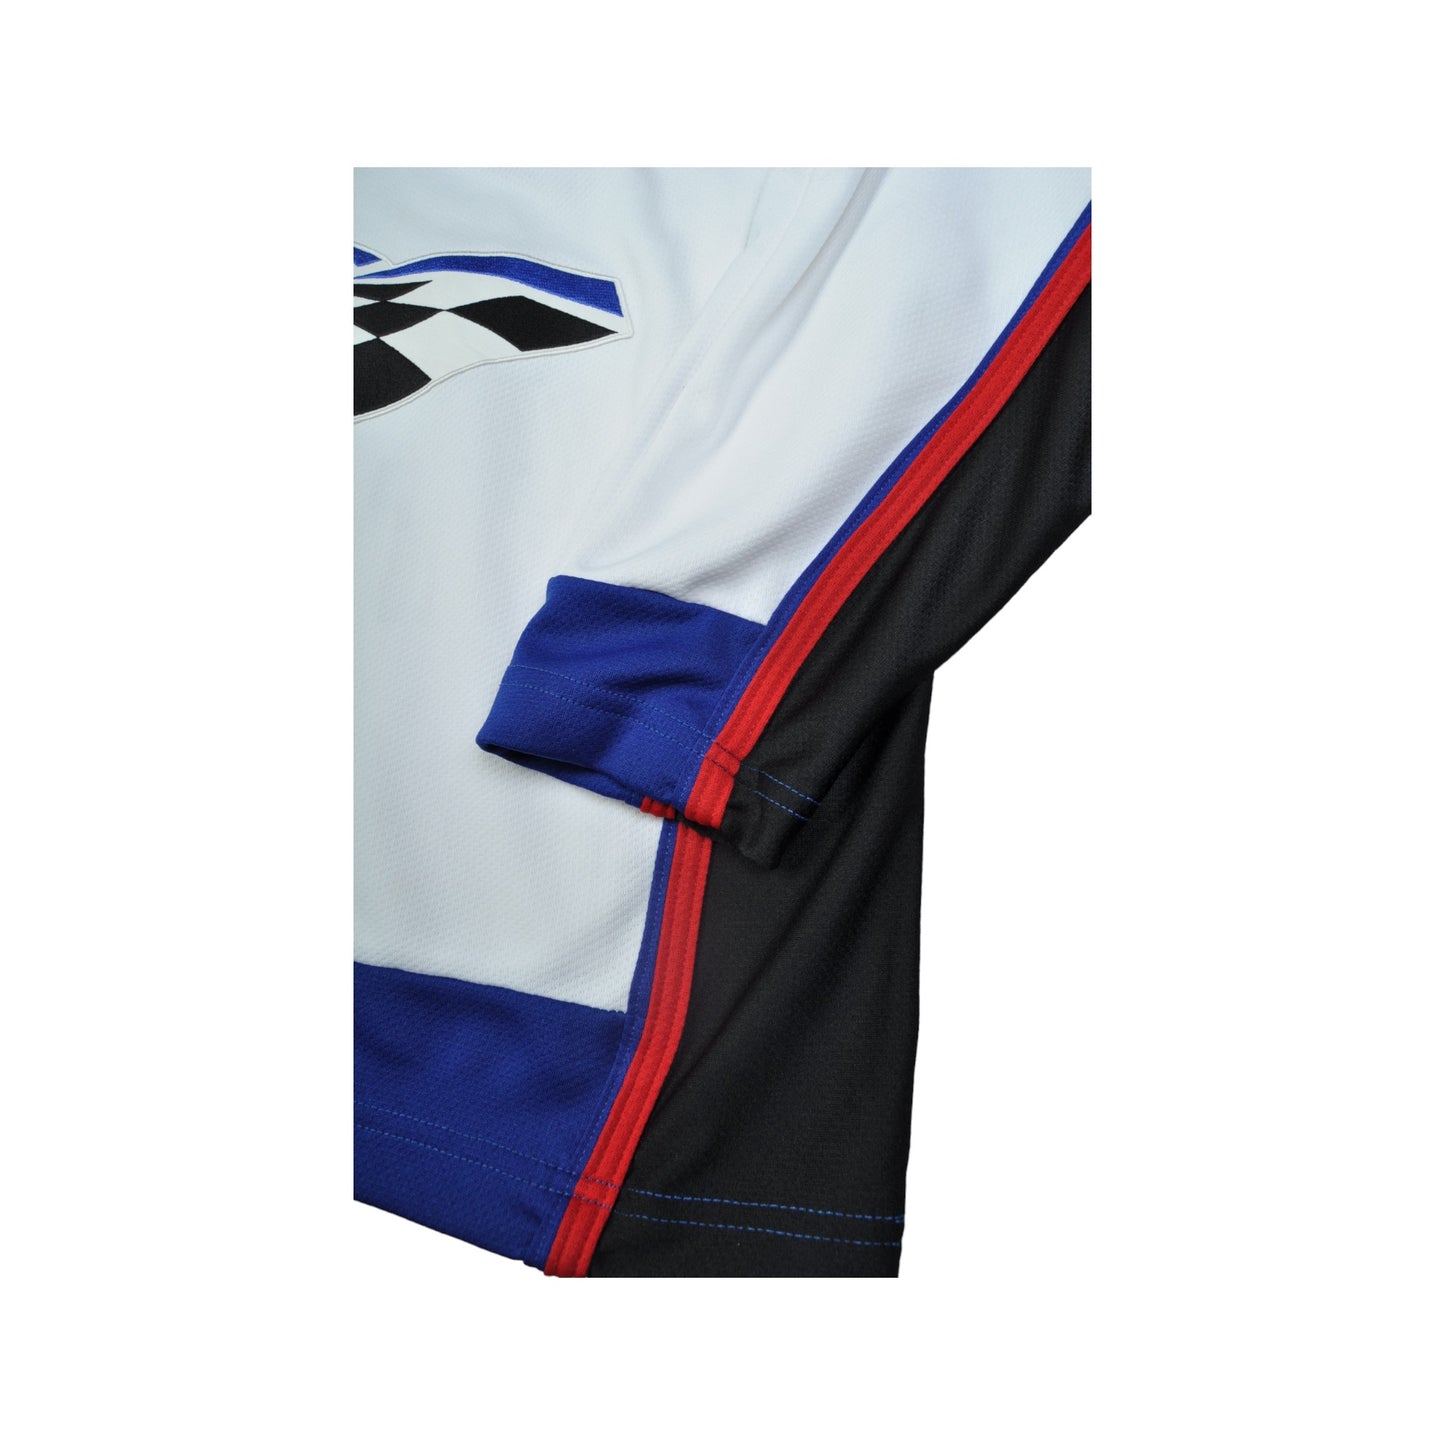 Vintage Racing Jersey White Small